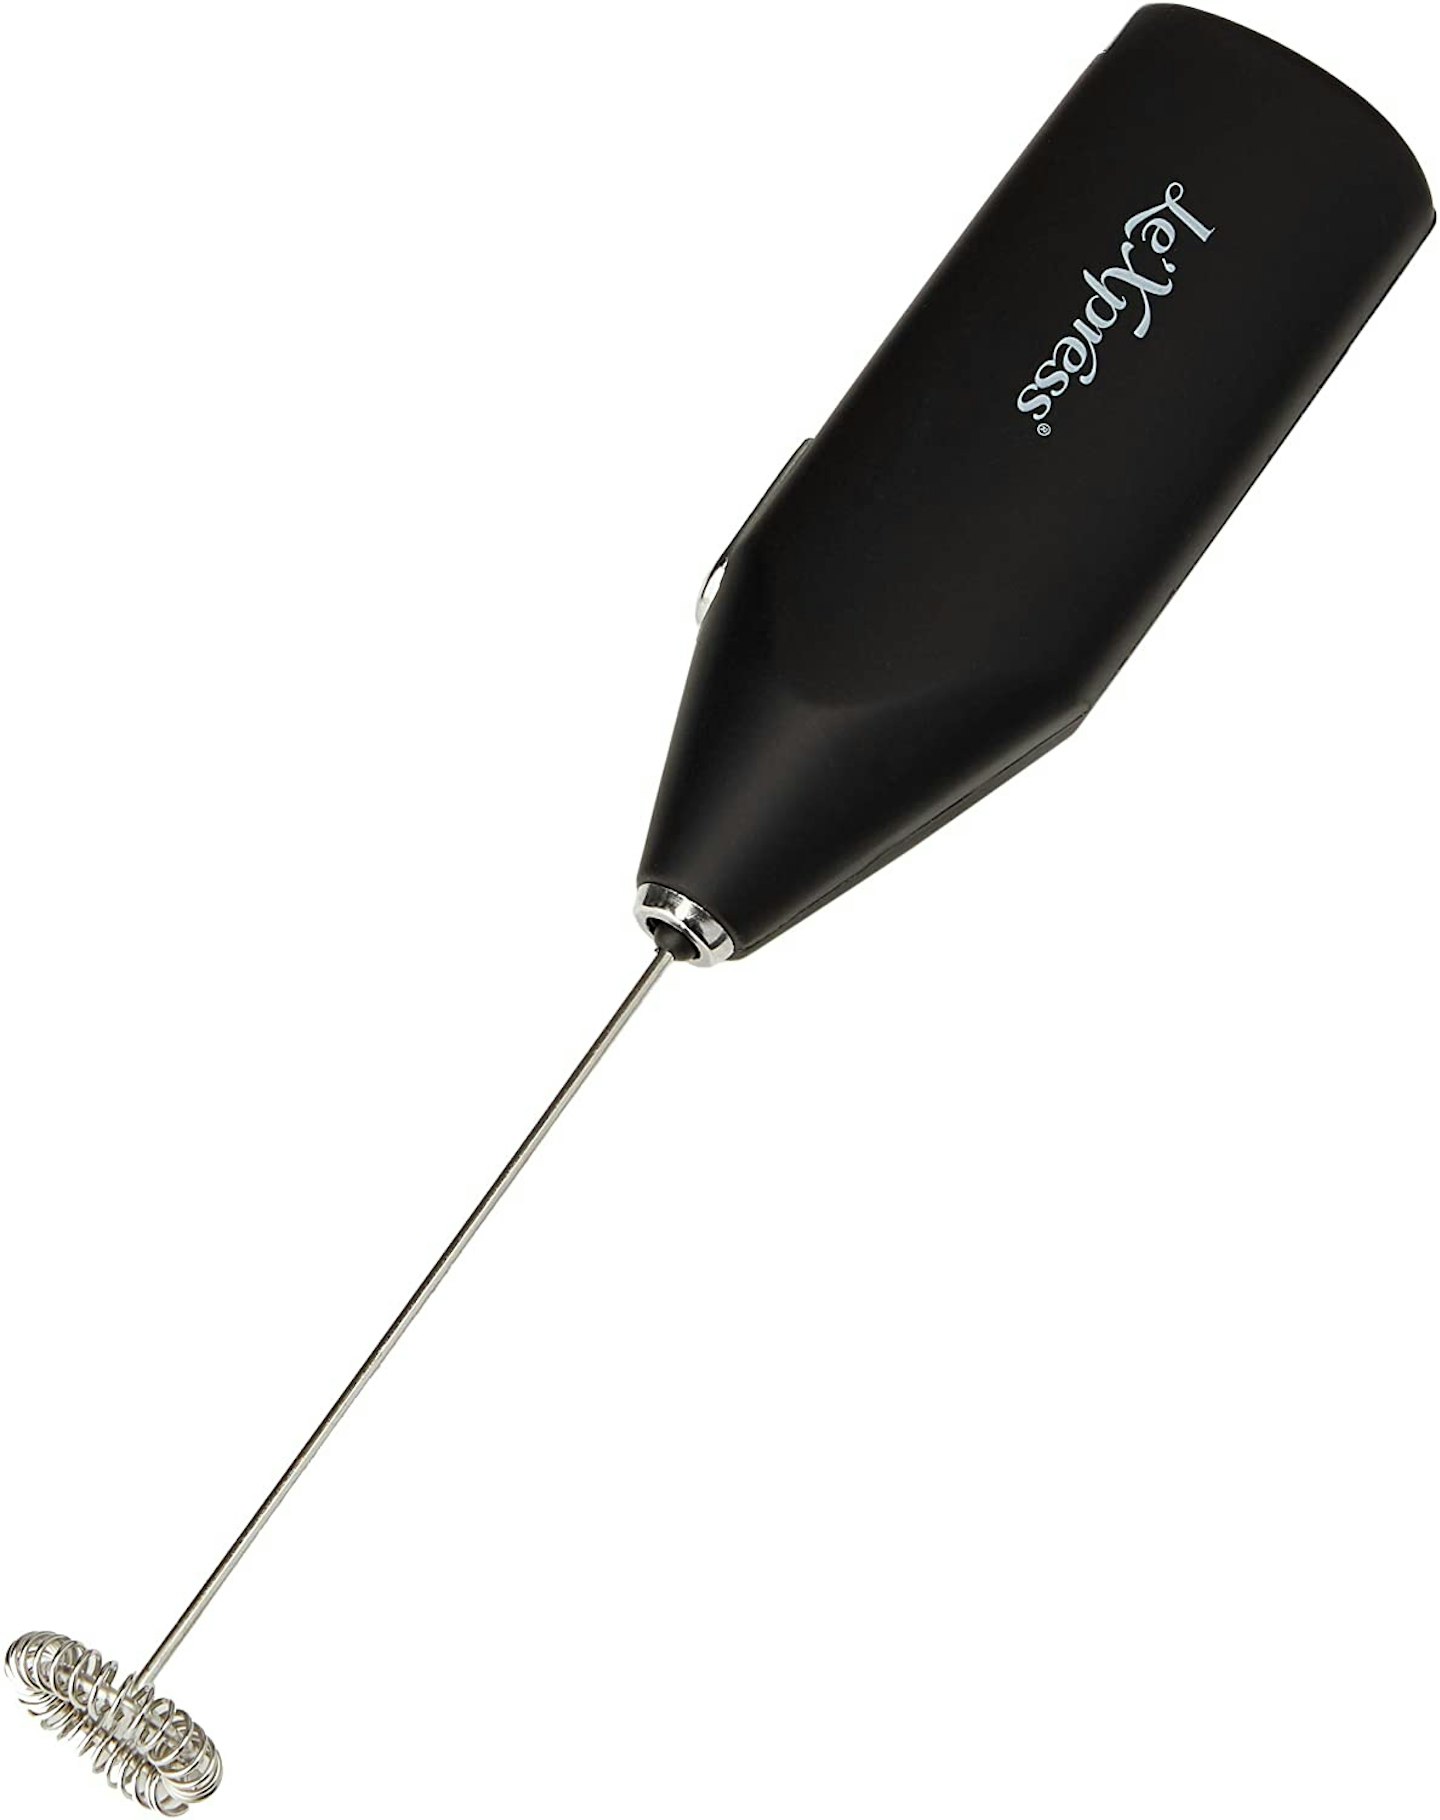 KitchenCraft Le'Xpress Electric Milk Frother Whisk